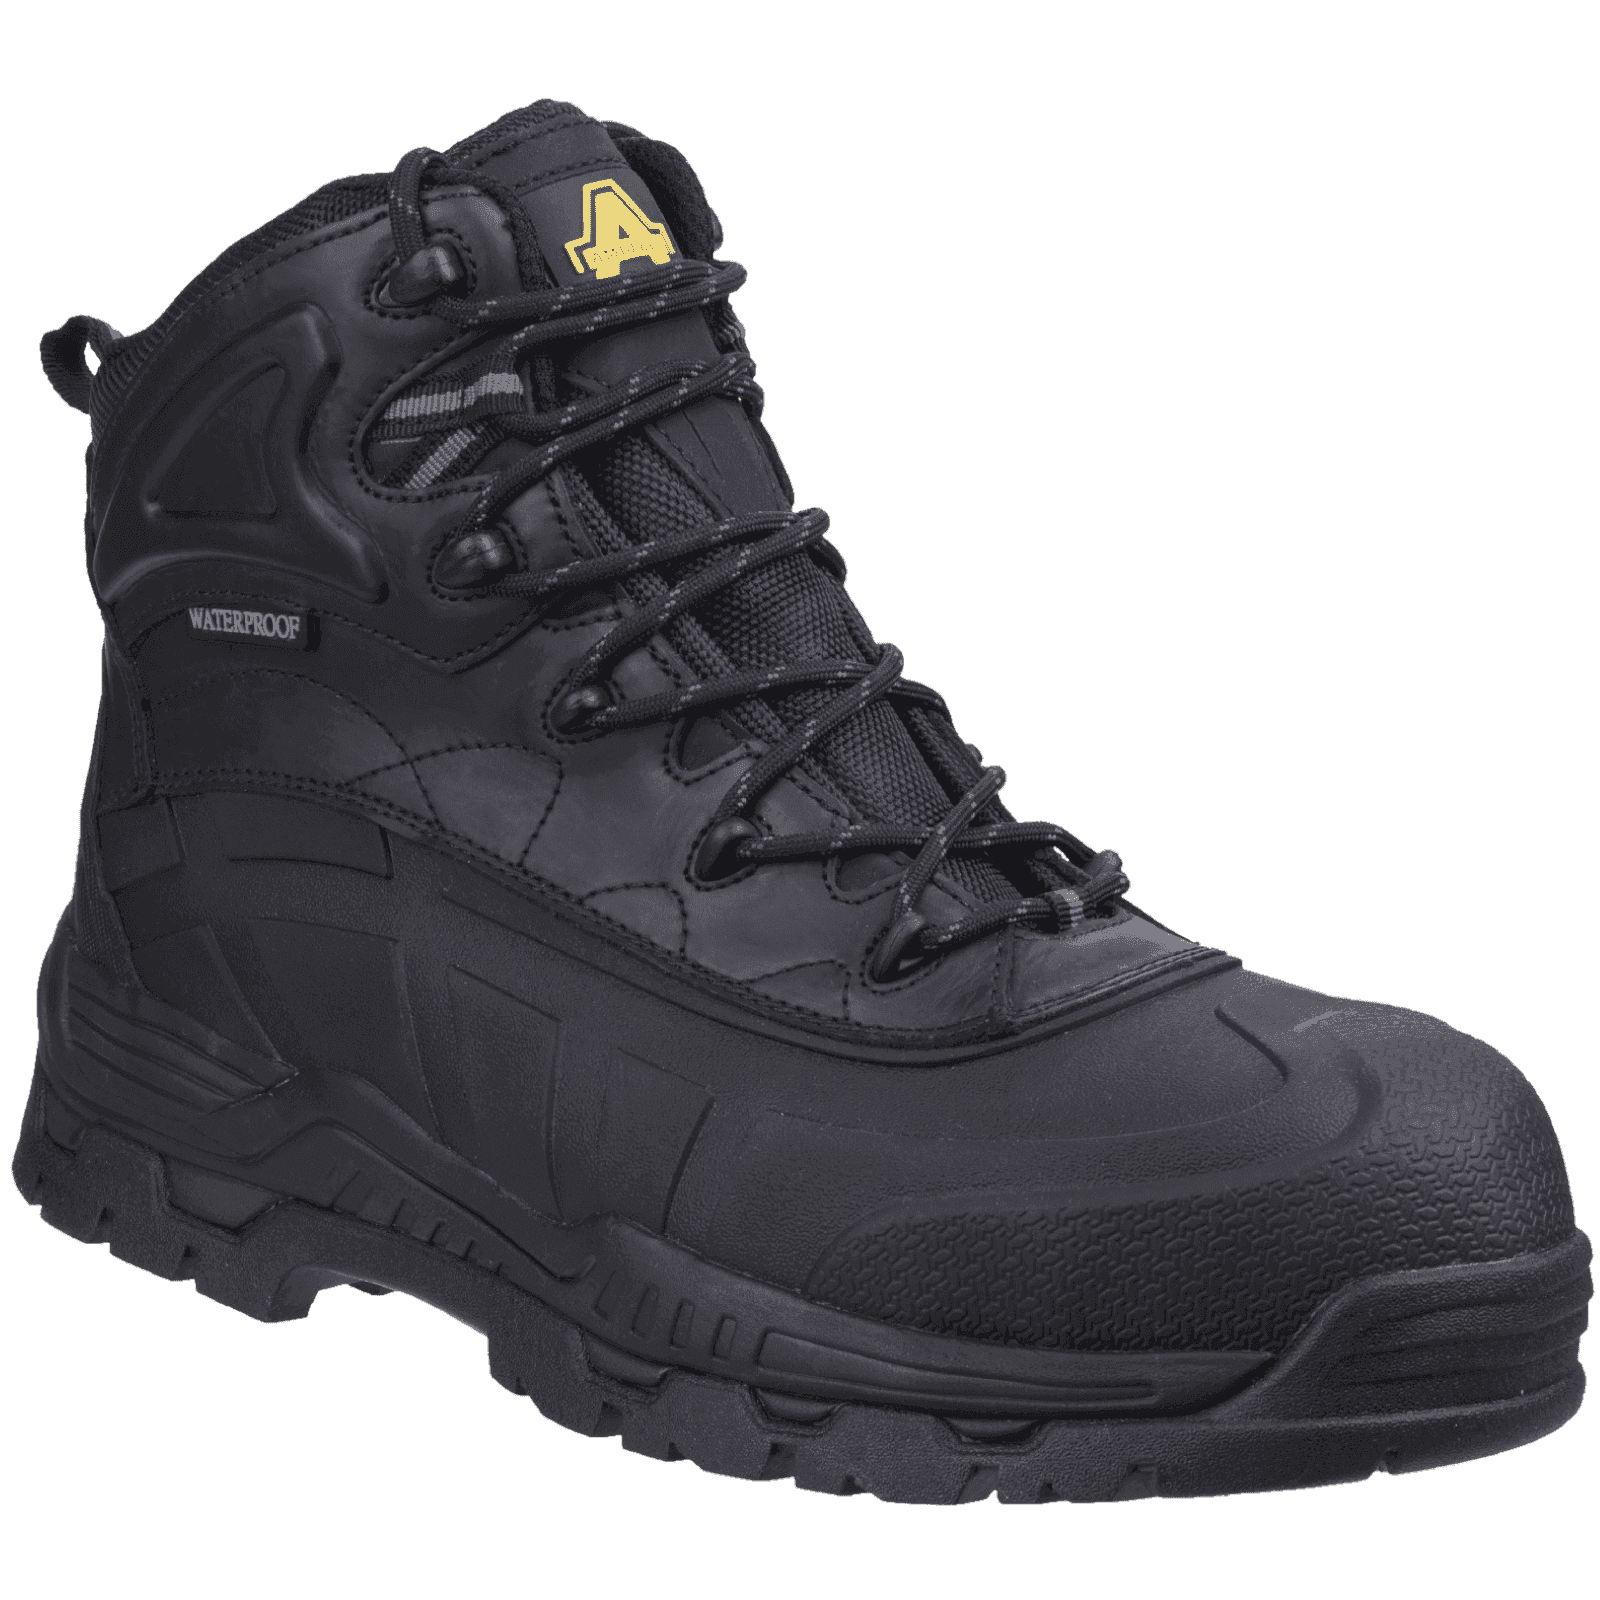 FS430 Orca Hybrid Waterproof Safety Boots